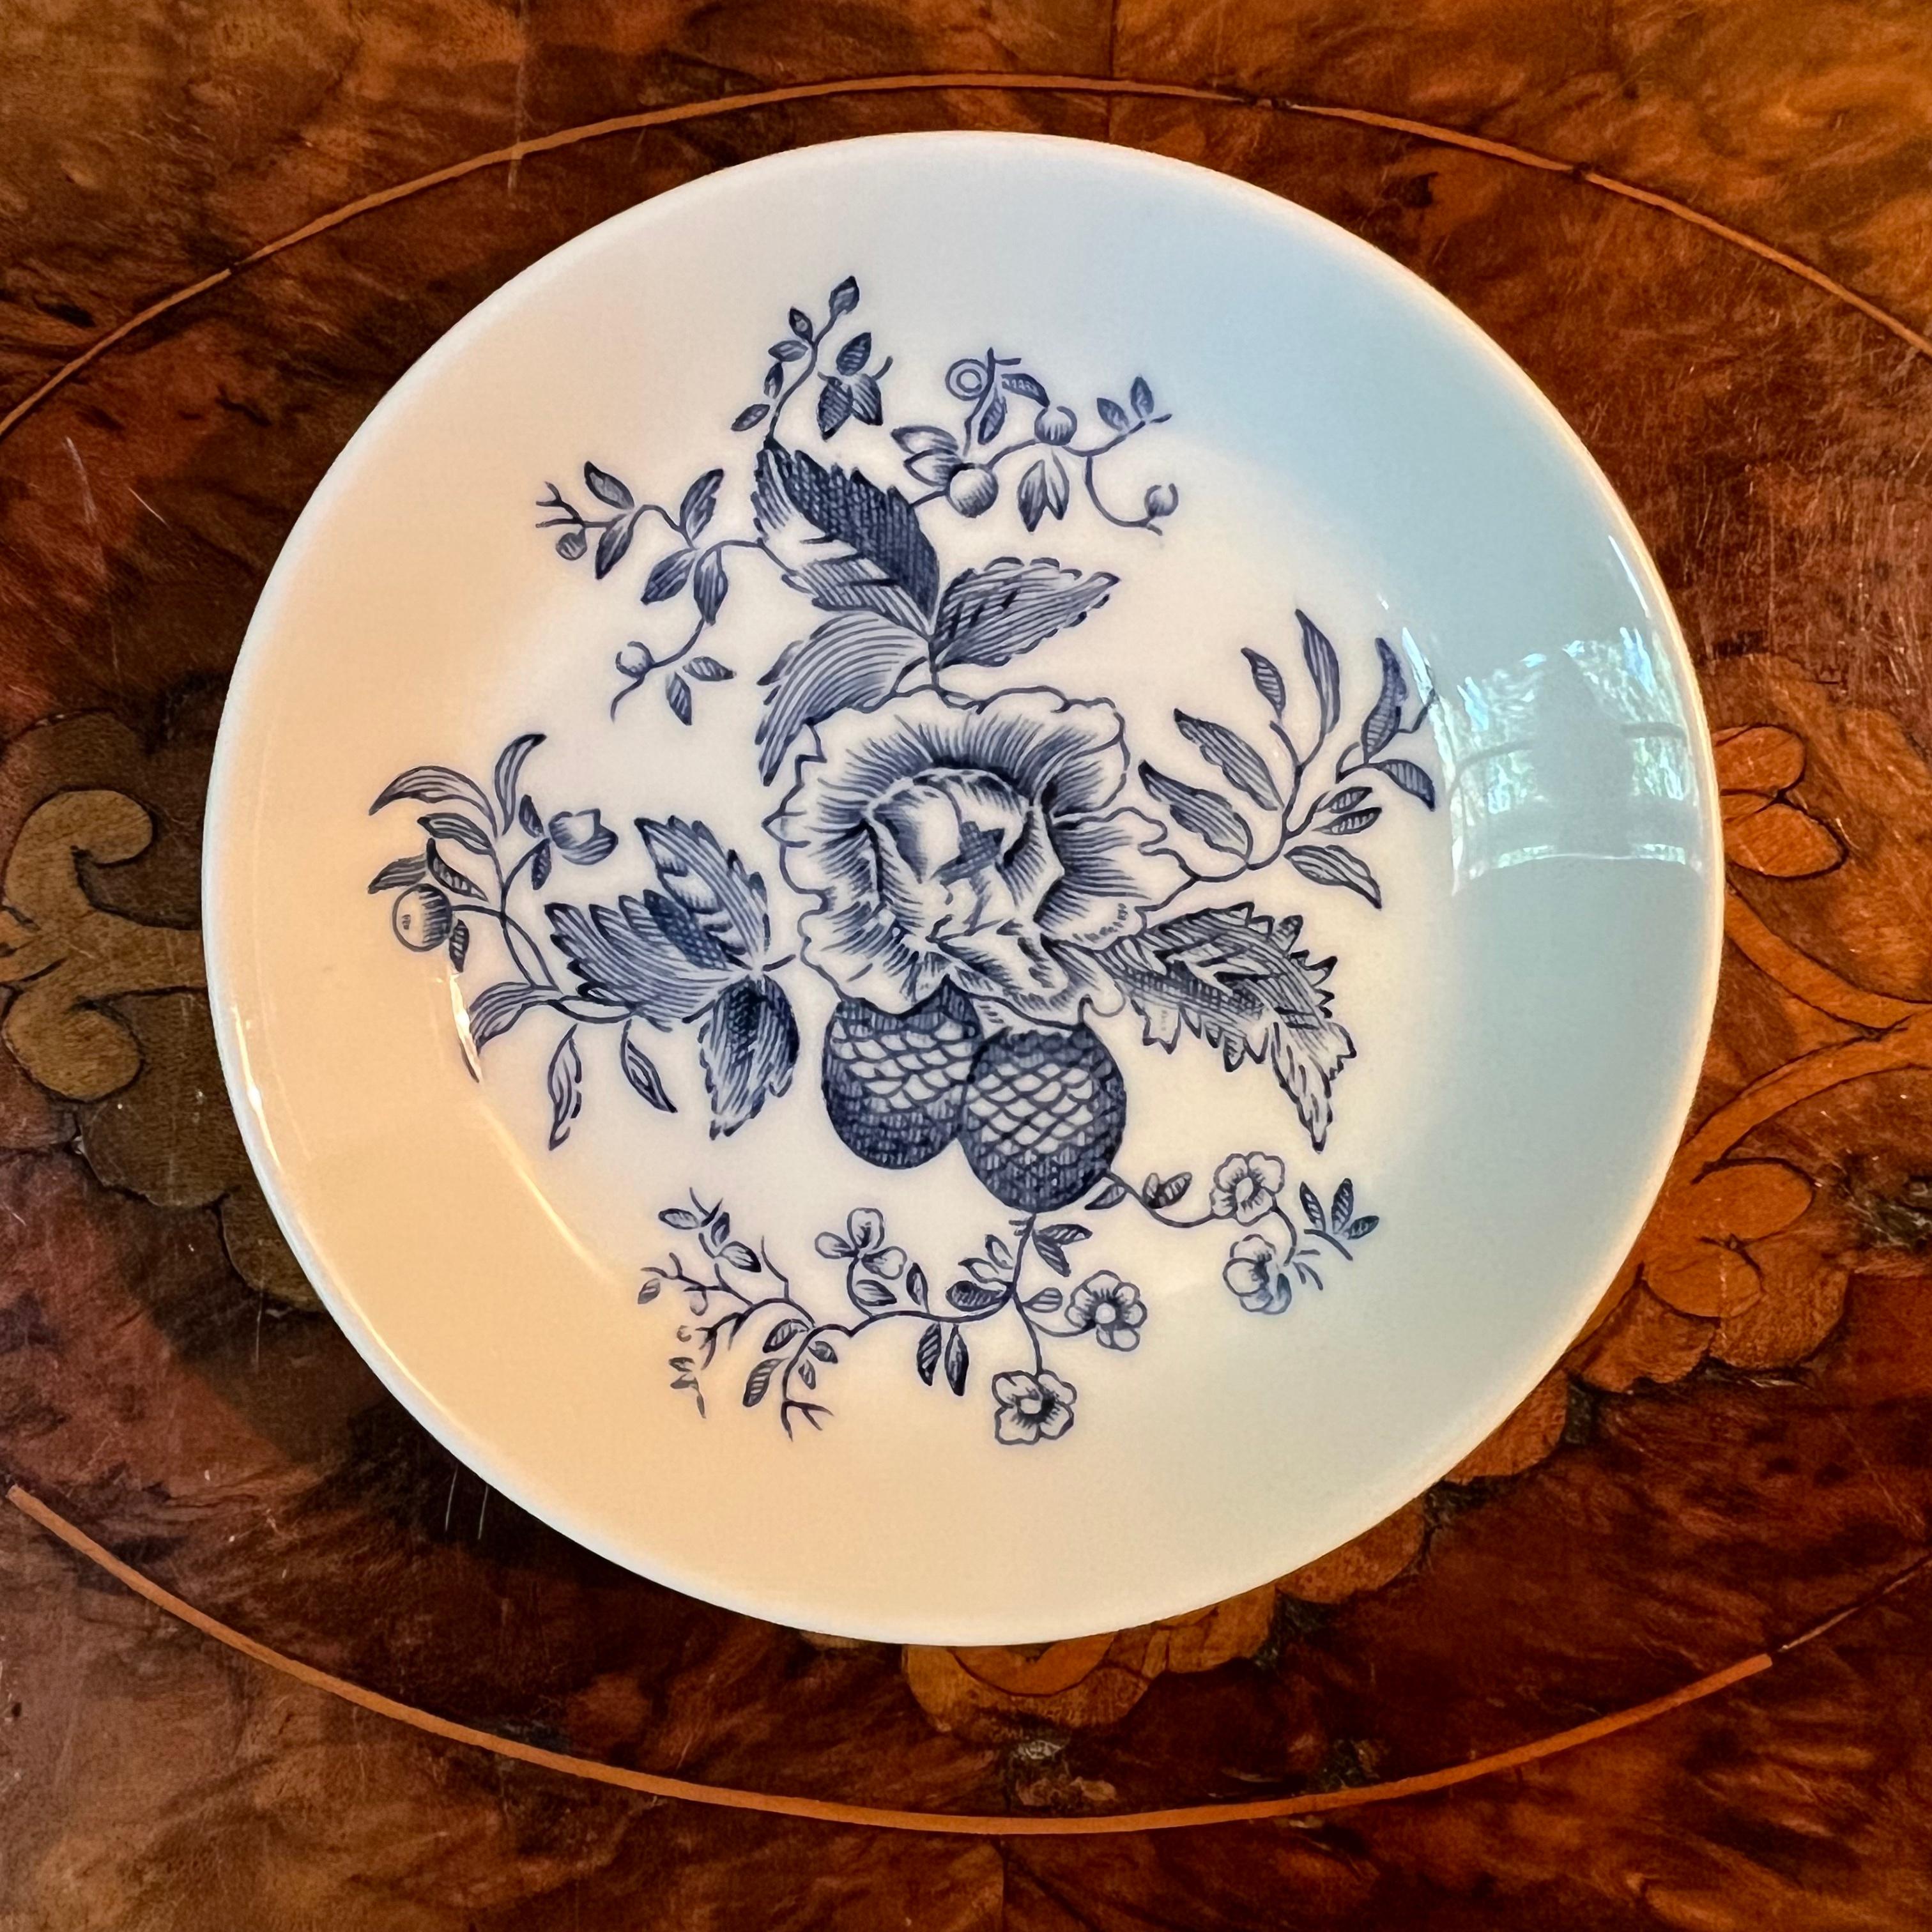 Blue floral print, some scratches to dish, stamped Royal Worcester Blue Sprays.

Circa: 1950s

Material: Porcelain 

Country Of Origin: England 

Measurements: 1cm high, 9.5cm diameter 

Postage via Australia Post with tracking available